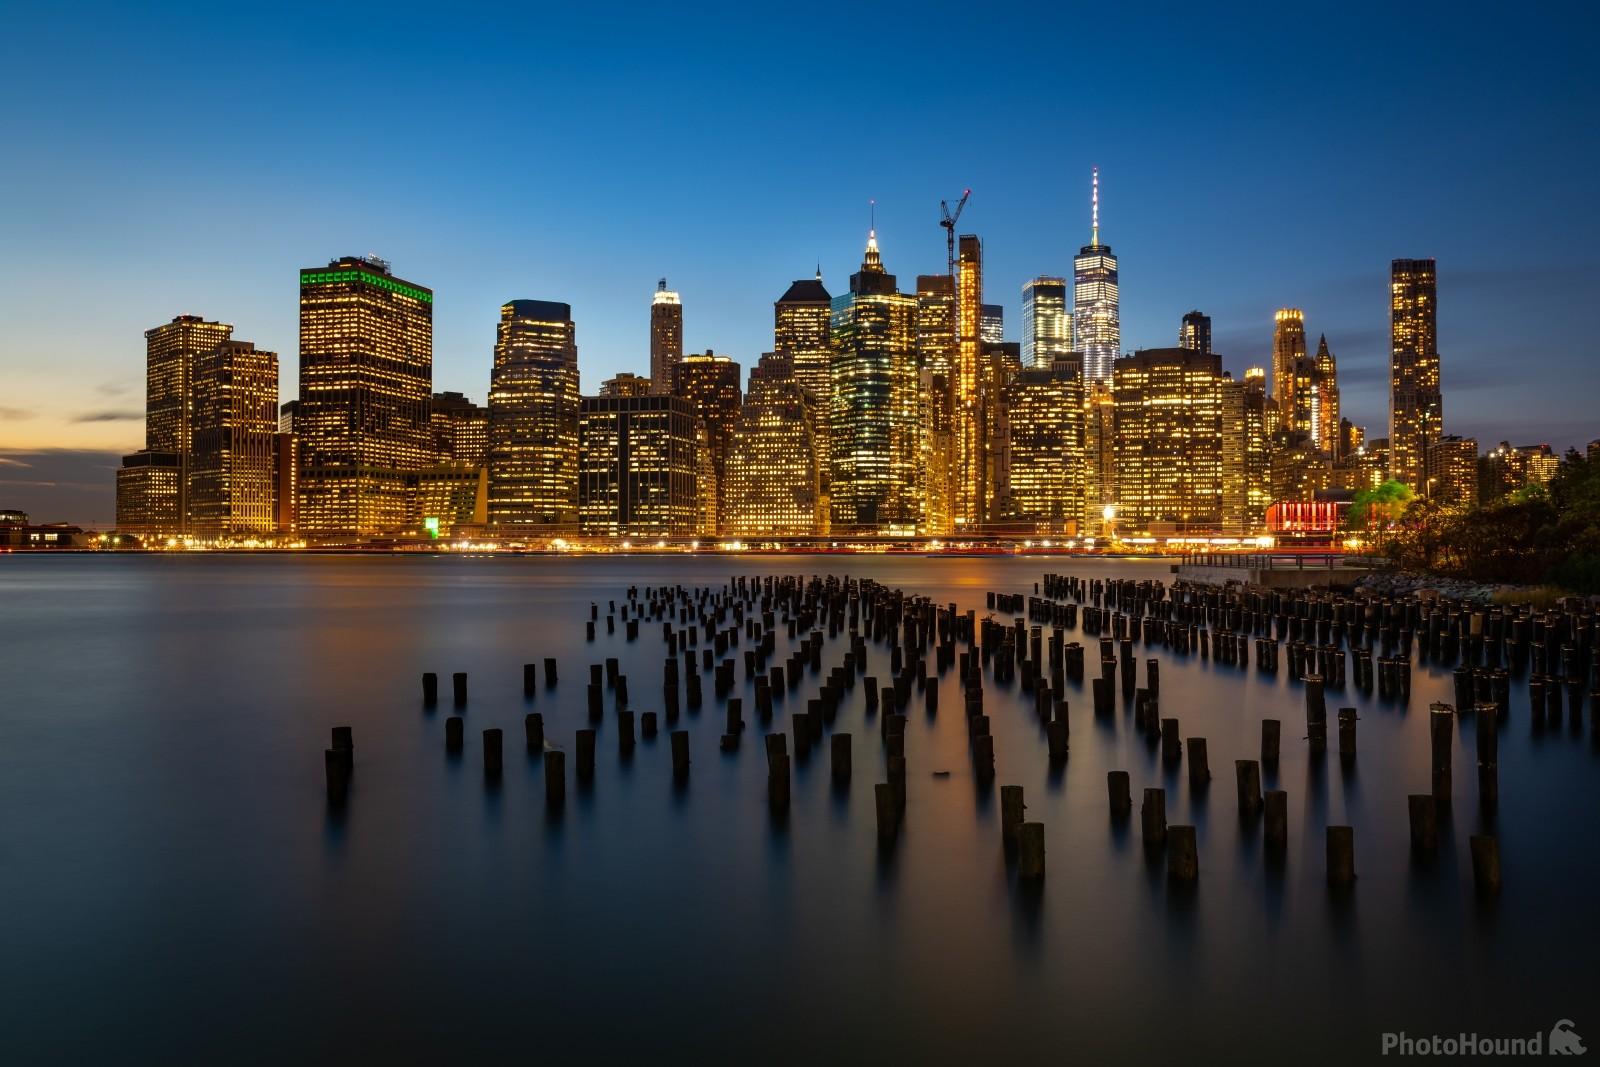 Image of Old wooden pillars in the East River - Old Pier 1 by VOJTa Herout